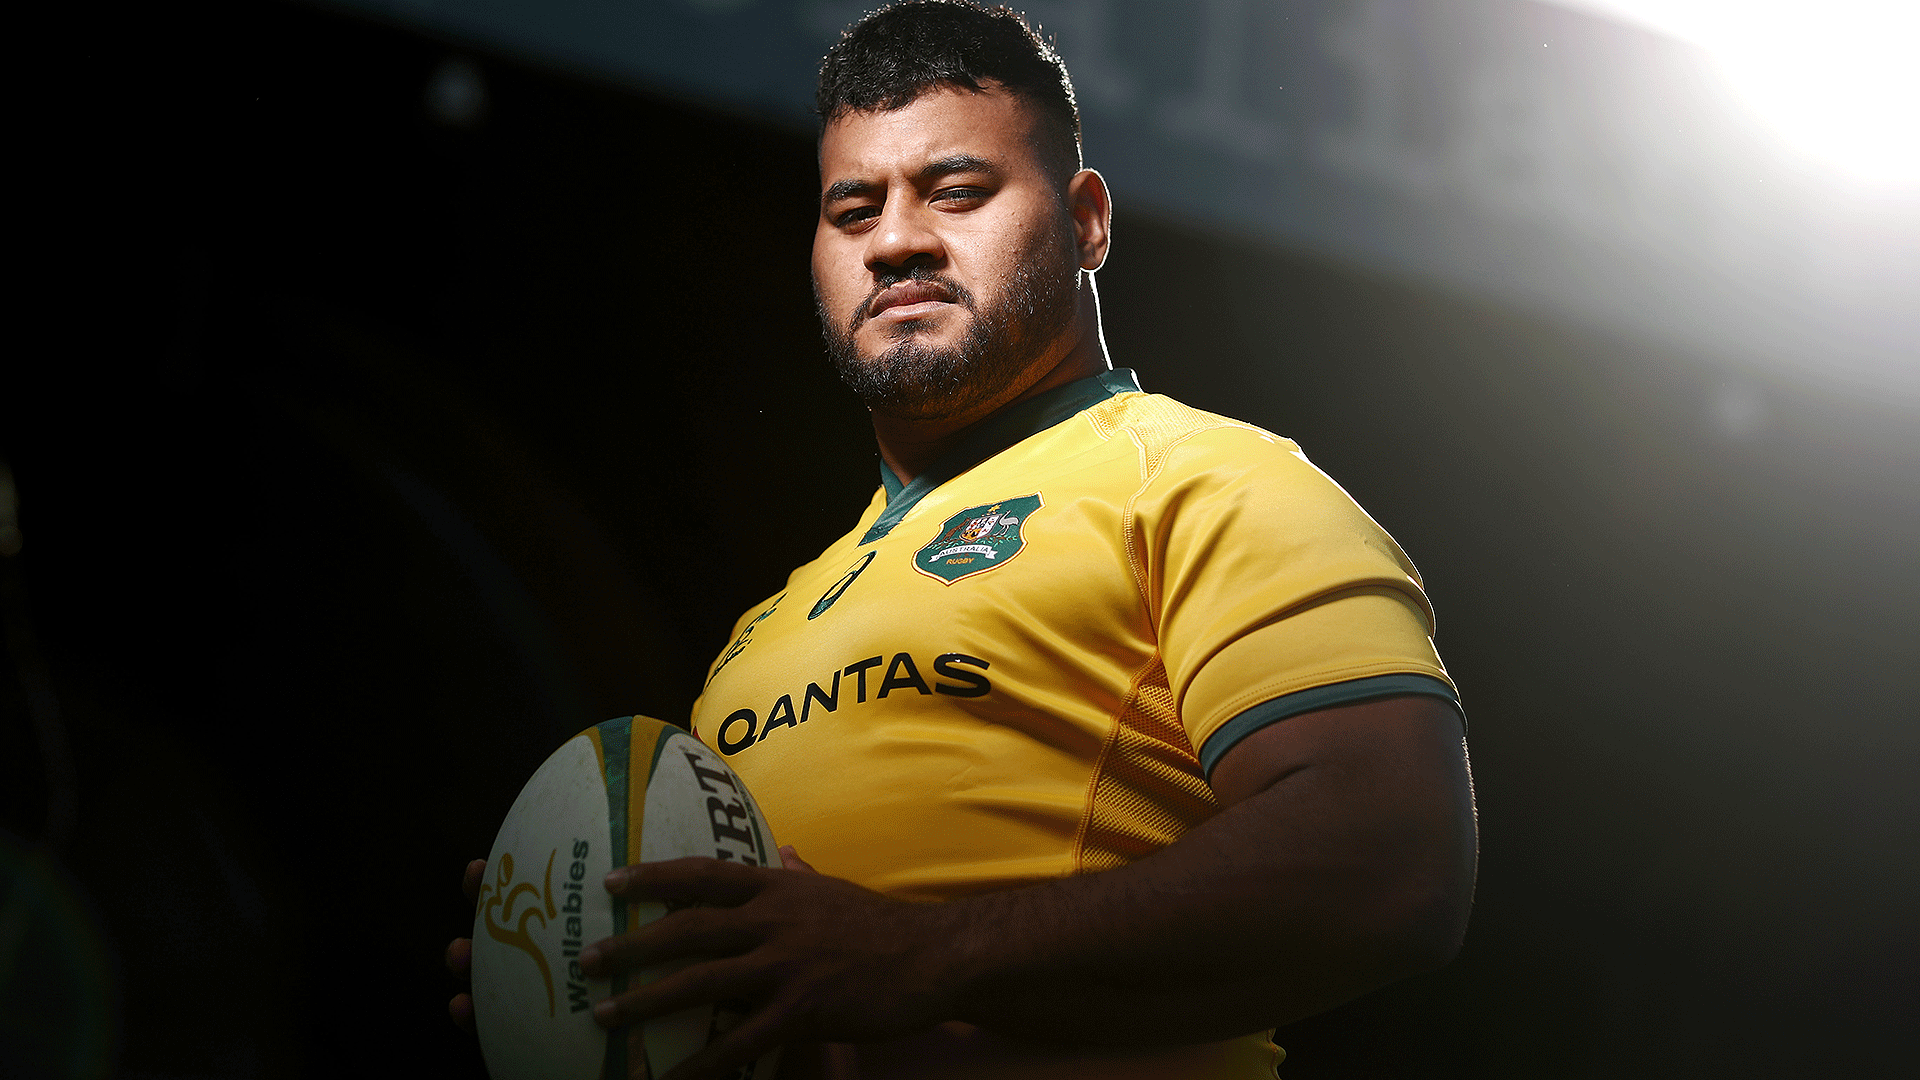 Wallabies ready to pile more pain on Boks